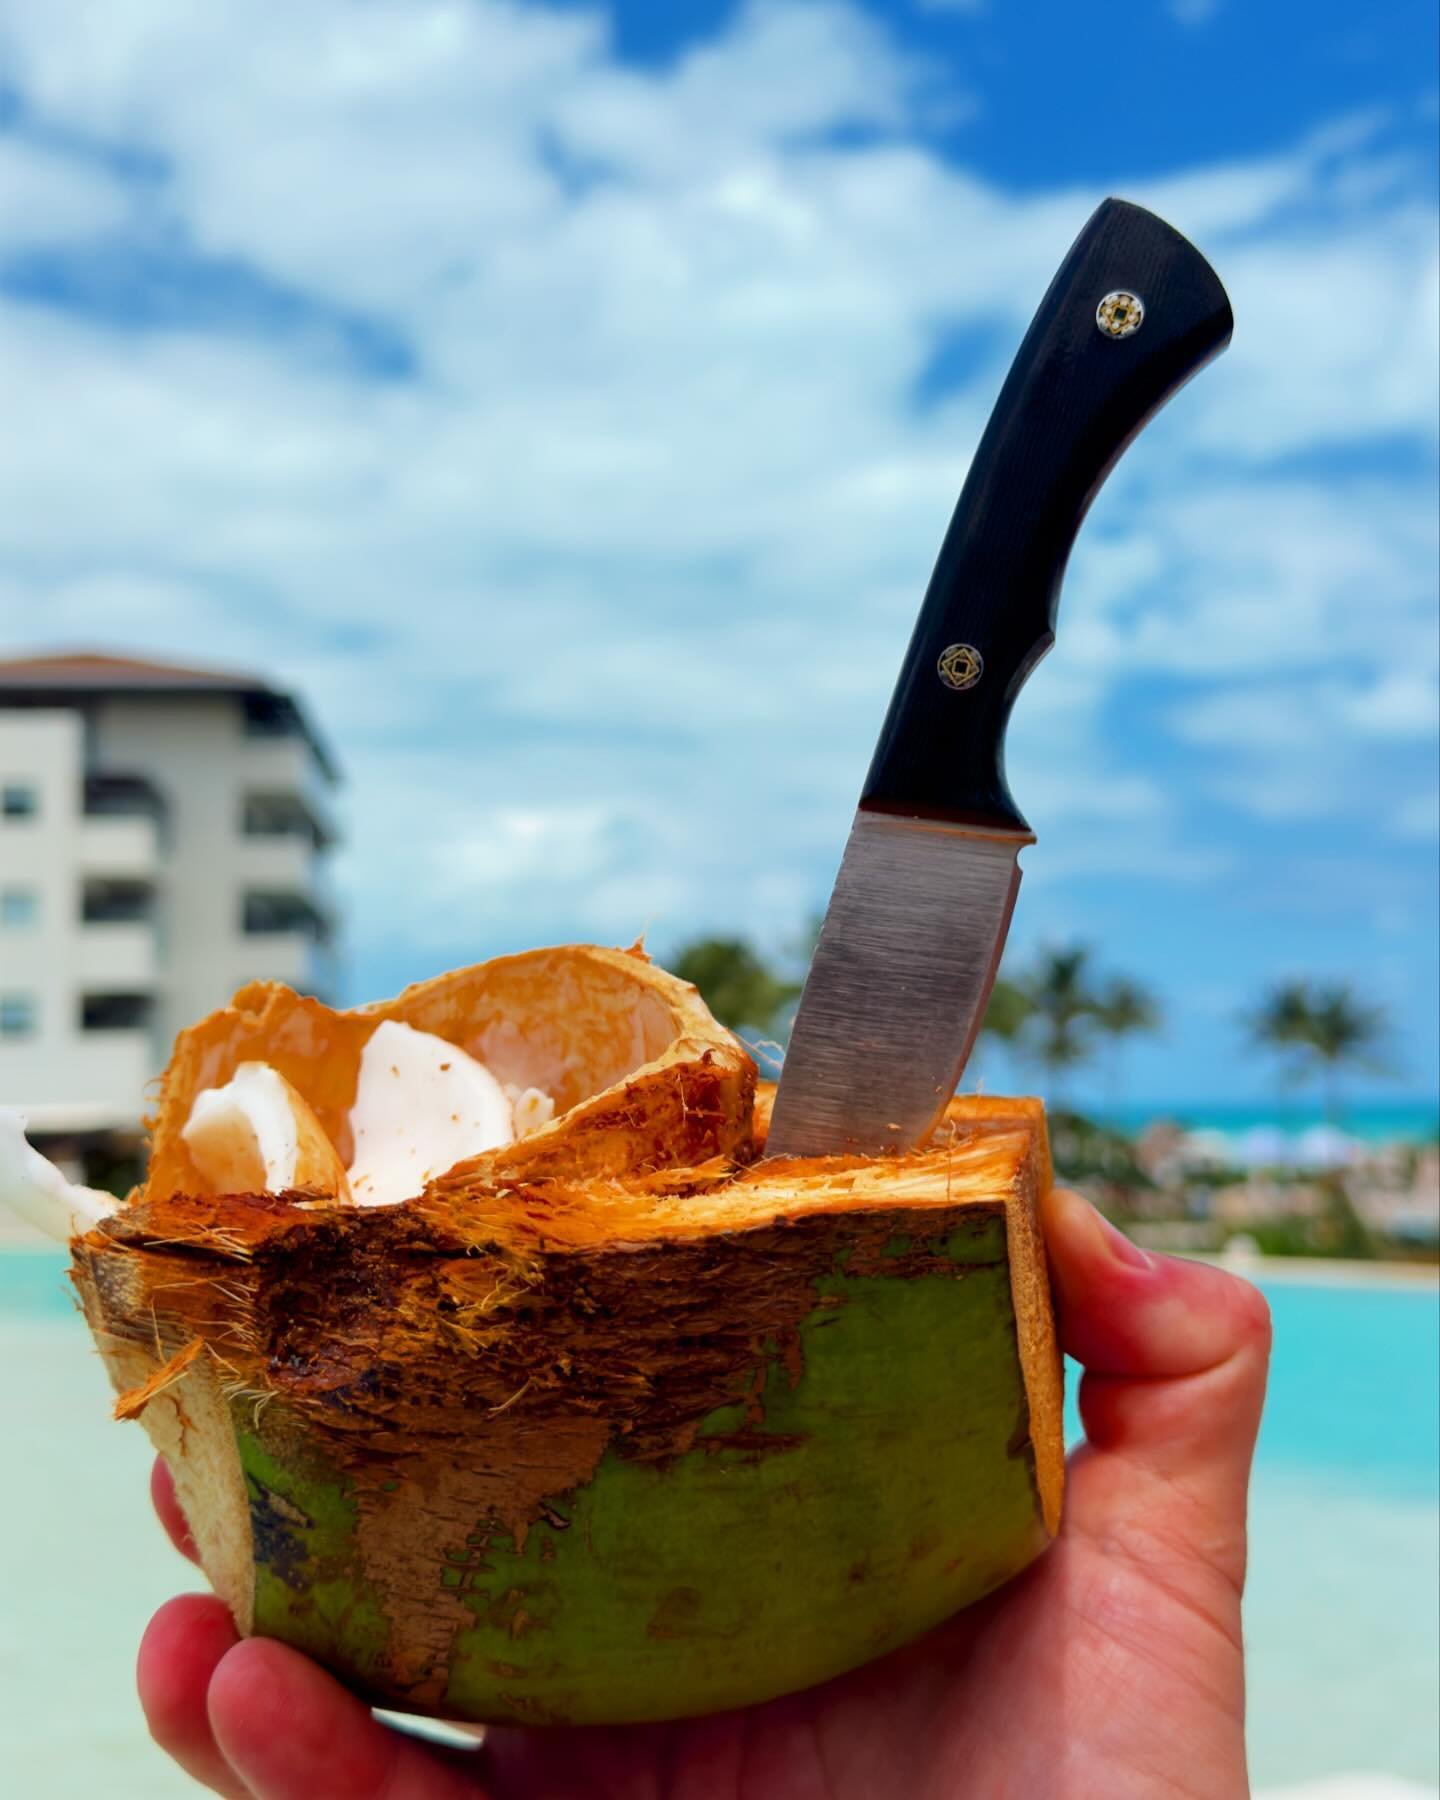 Some vacation time! Got to test out The Brother in MagnaCut at the beach, in the pool and busting open some coconuts. Still holding up a great edge! 

#handmade #knife #knives #blade #blades #sinanblades #sinan #steel #stainlesssteel #damascus #damas